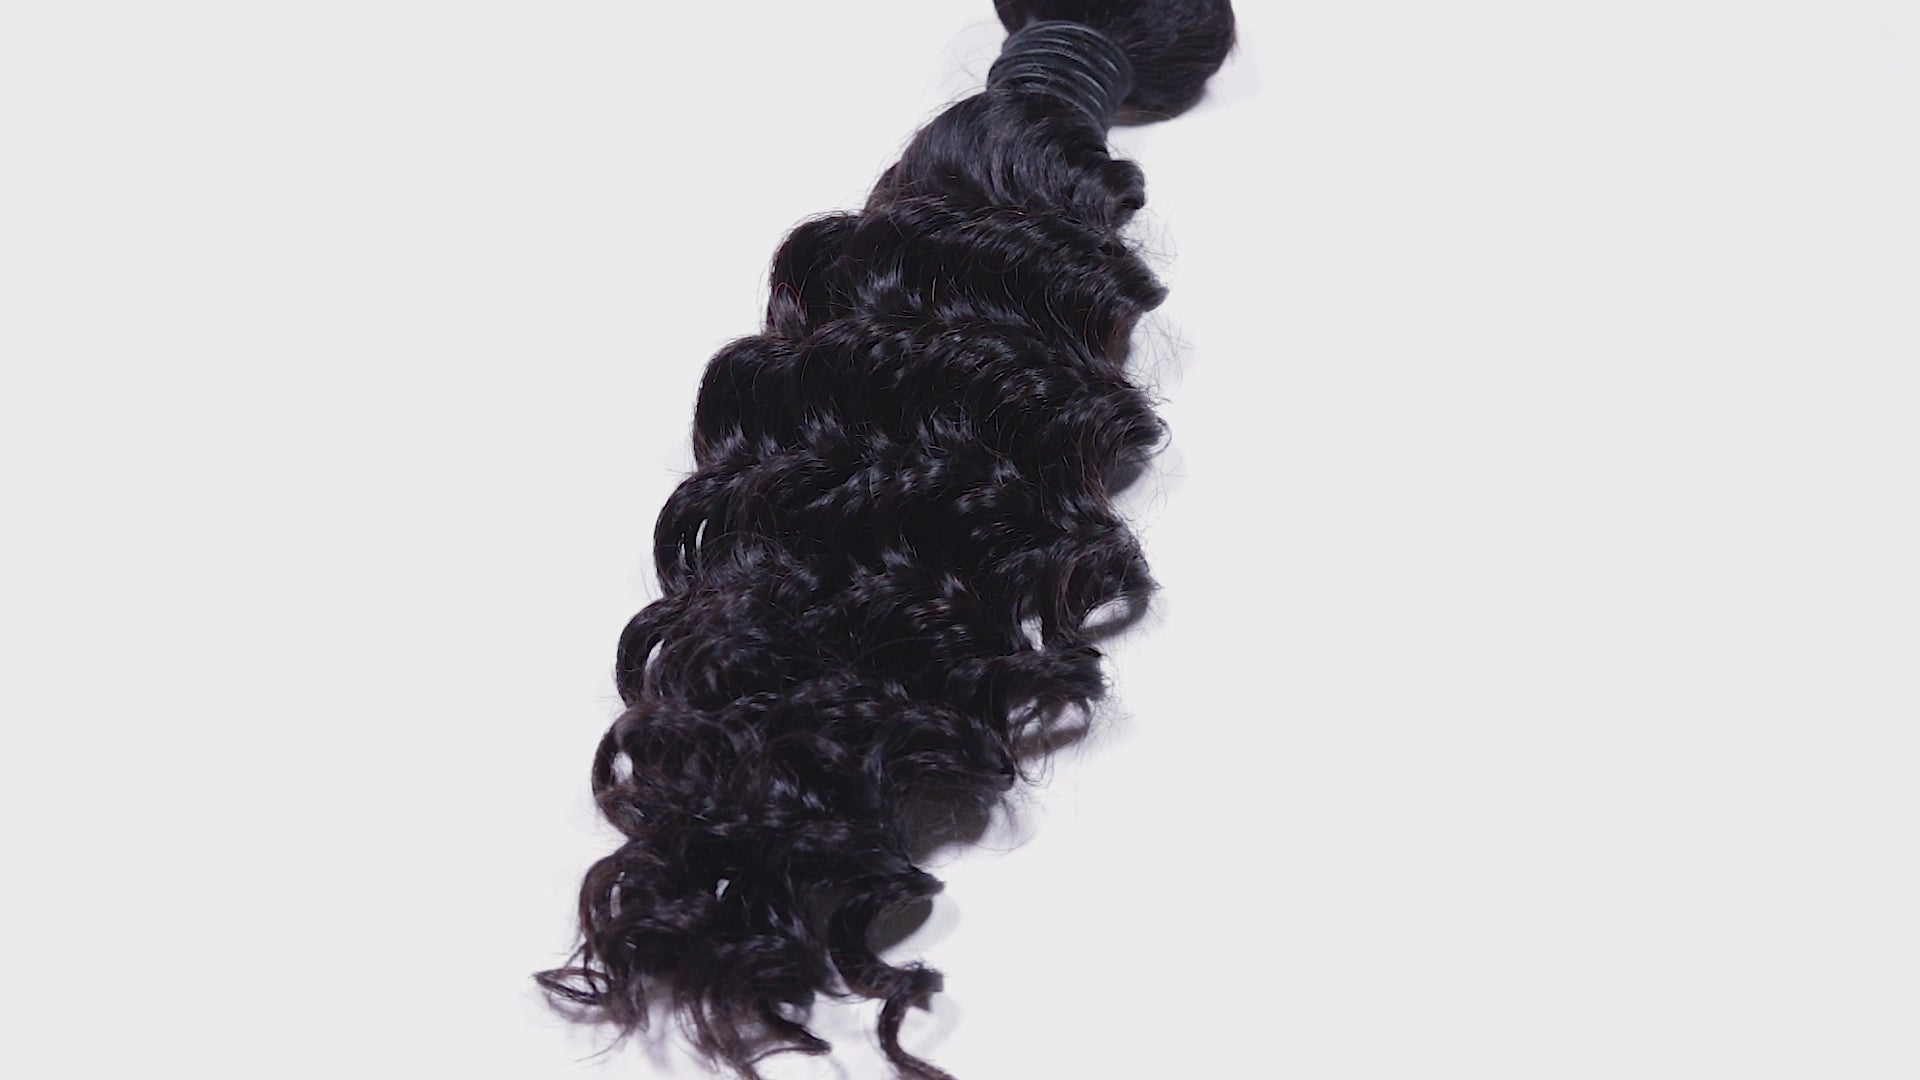 Brazilian Deep Wave Hair Extensions offer a beautiful curl pattern that is thick, bouncy and beautiful. You can style and color and easily straighten this hair with ease.  Lengths: 10" - 32" Hair Grade: VIRGIN HAIR Wefts: Machined Double Stitch Style: Deep Wave Weight: 100 grams / 3.5 oz